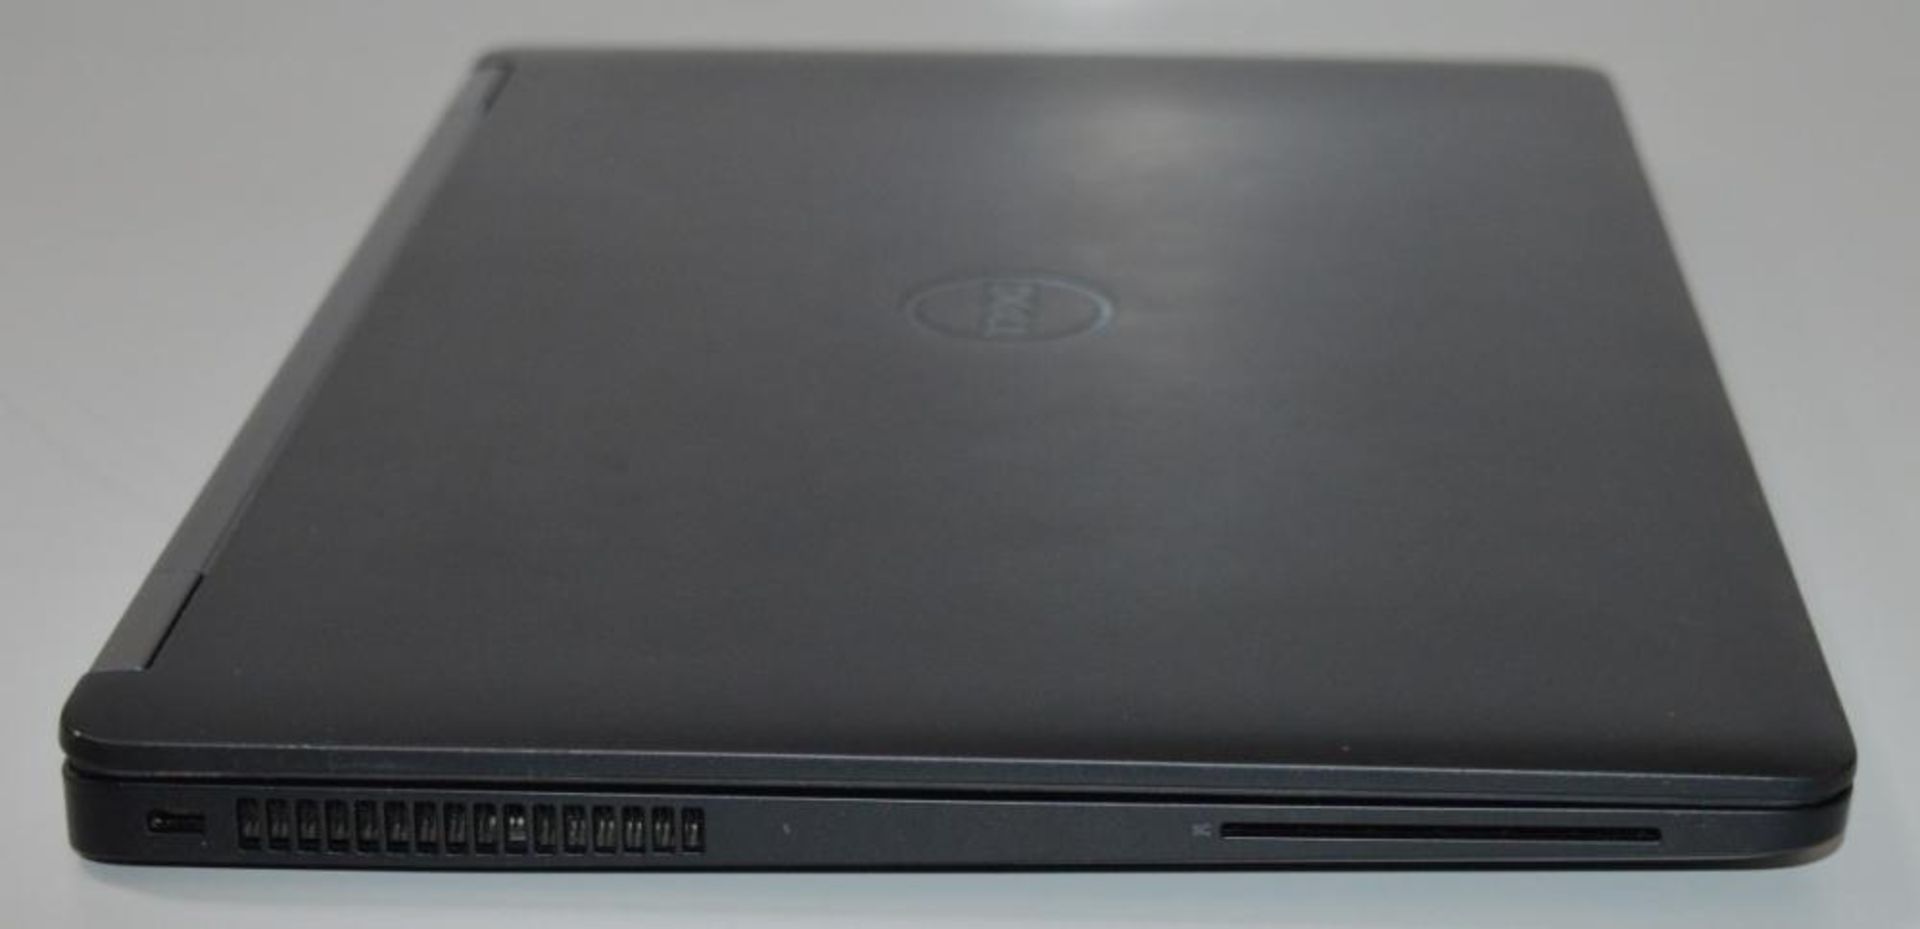 1 x Dell Latitude E7470 Laptop Computer - 14 Inch FHD Screen - Features Include a 6th Gen Core i7- - Image 6 of 10